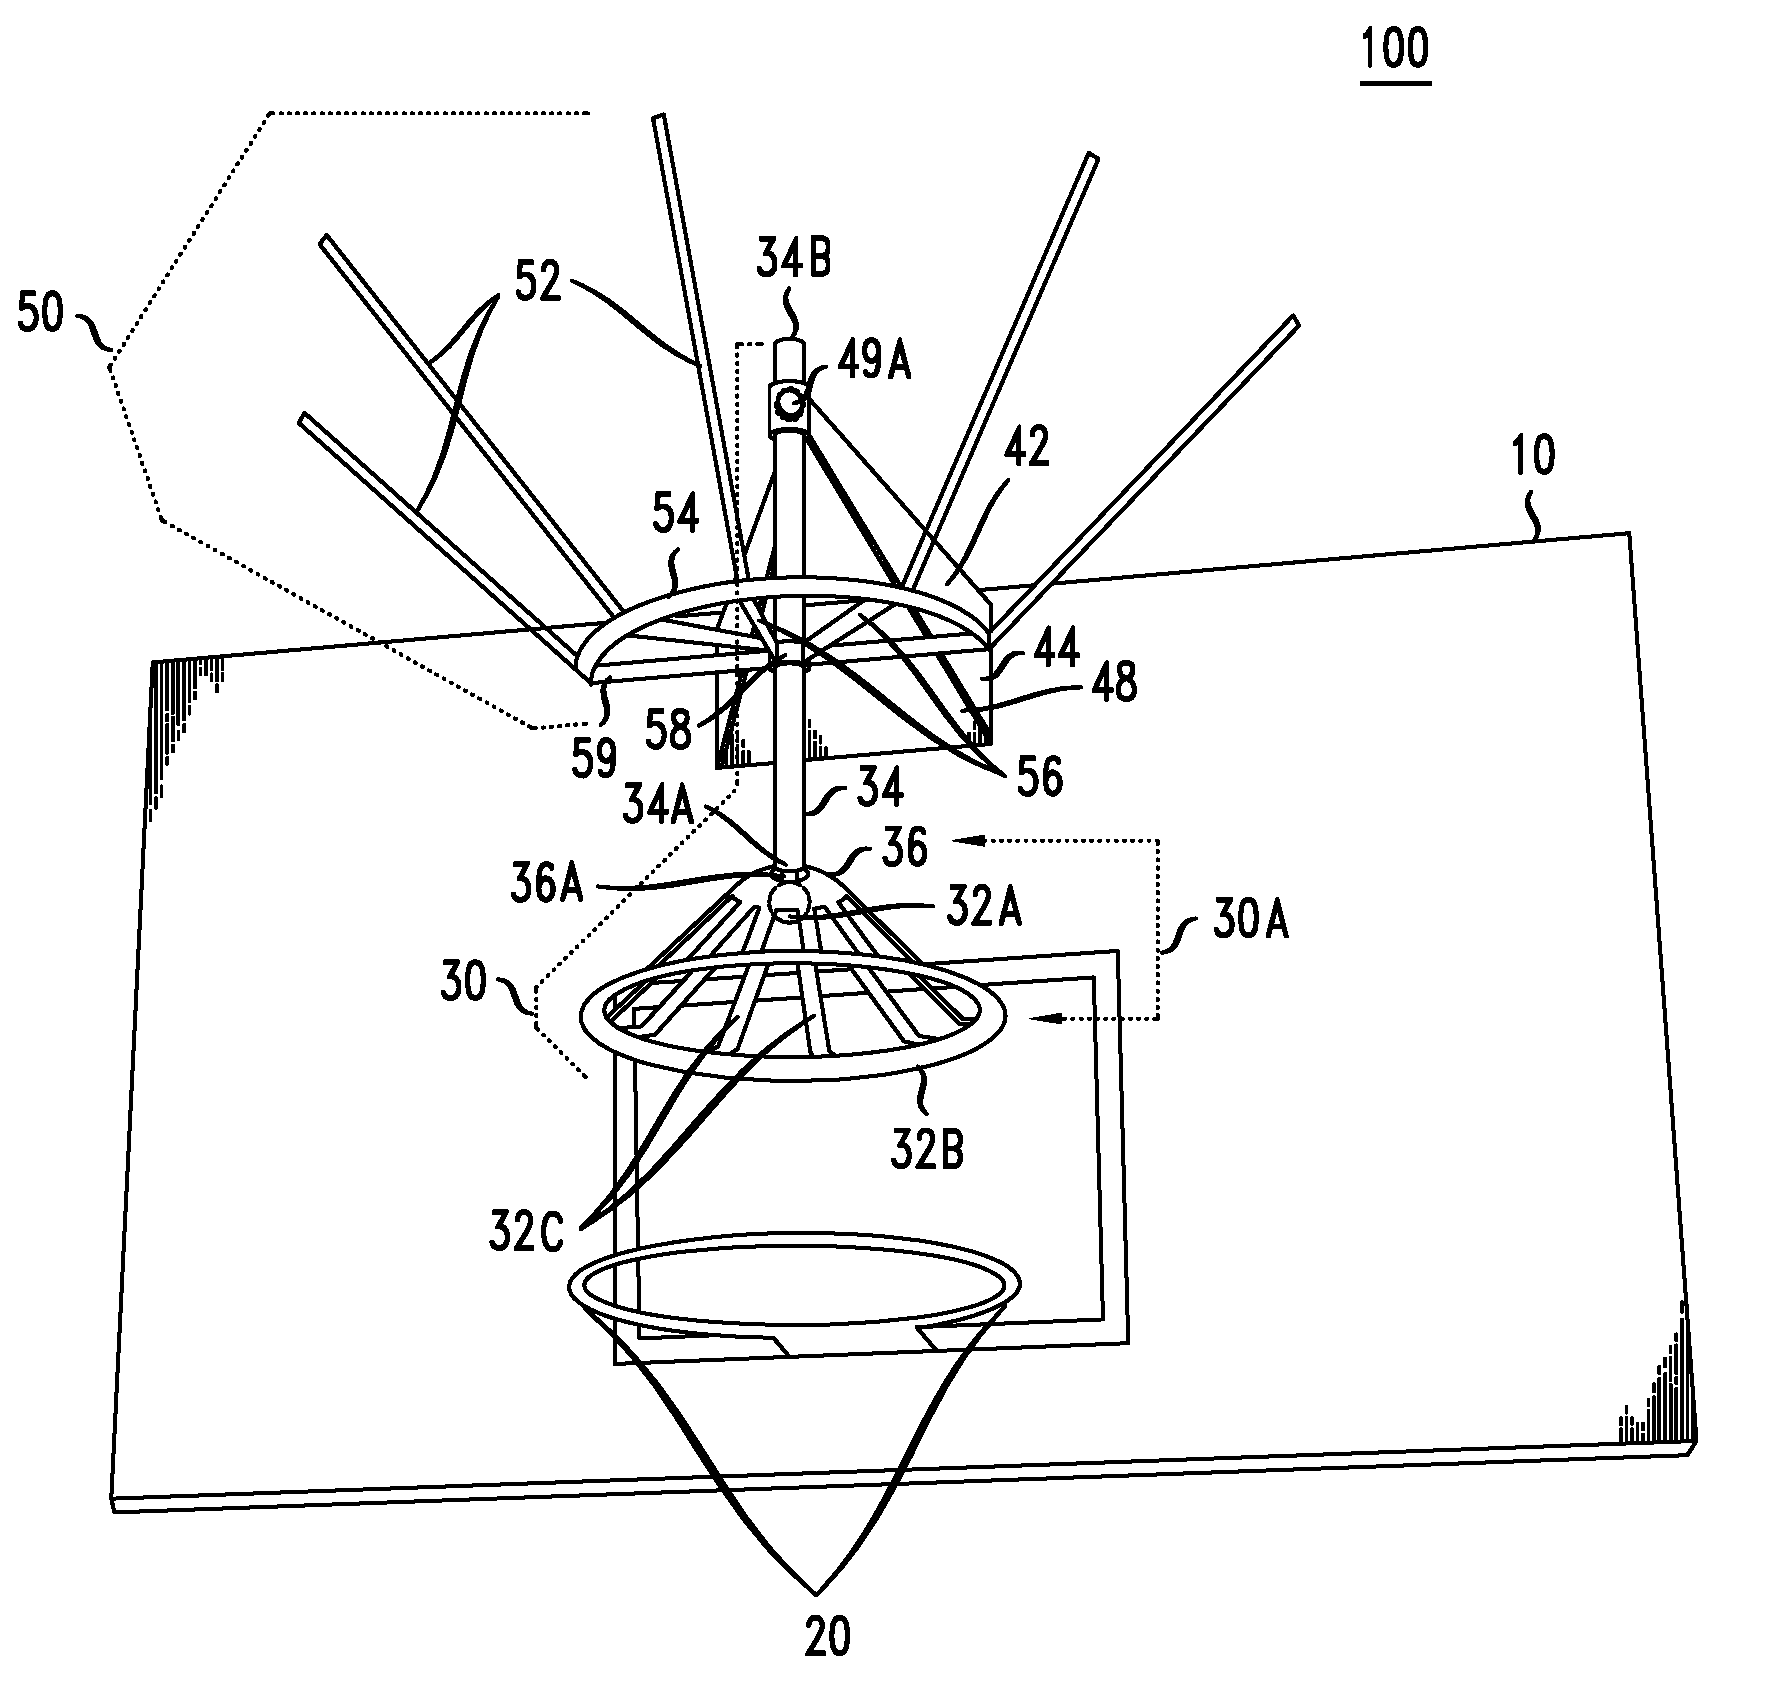 Basketball training device, system and method